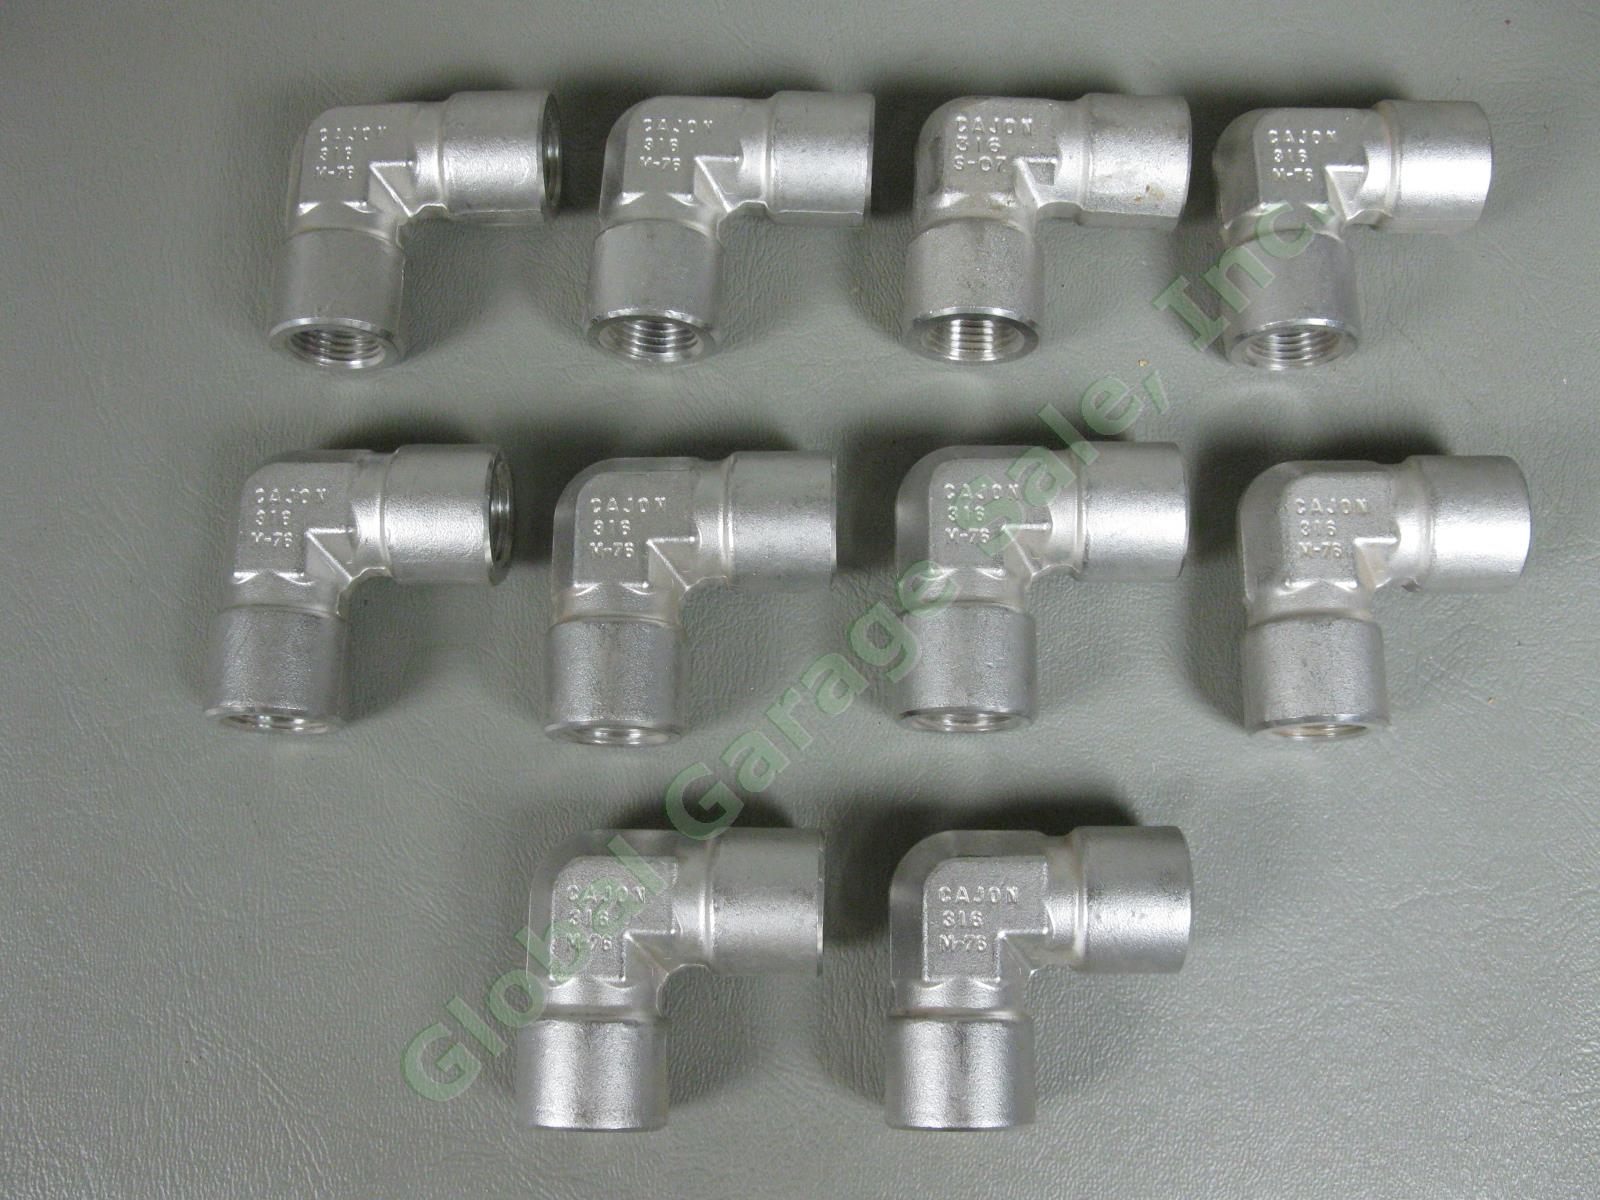 10 Cajun-316 3/8" Female 90° Degree Stainless Steel Elbow Lot SS M-76 Fitting NR